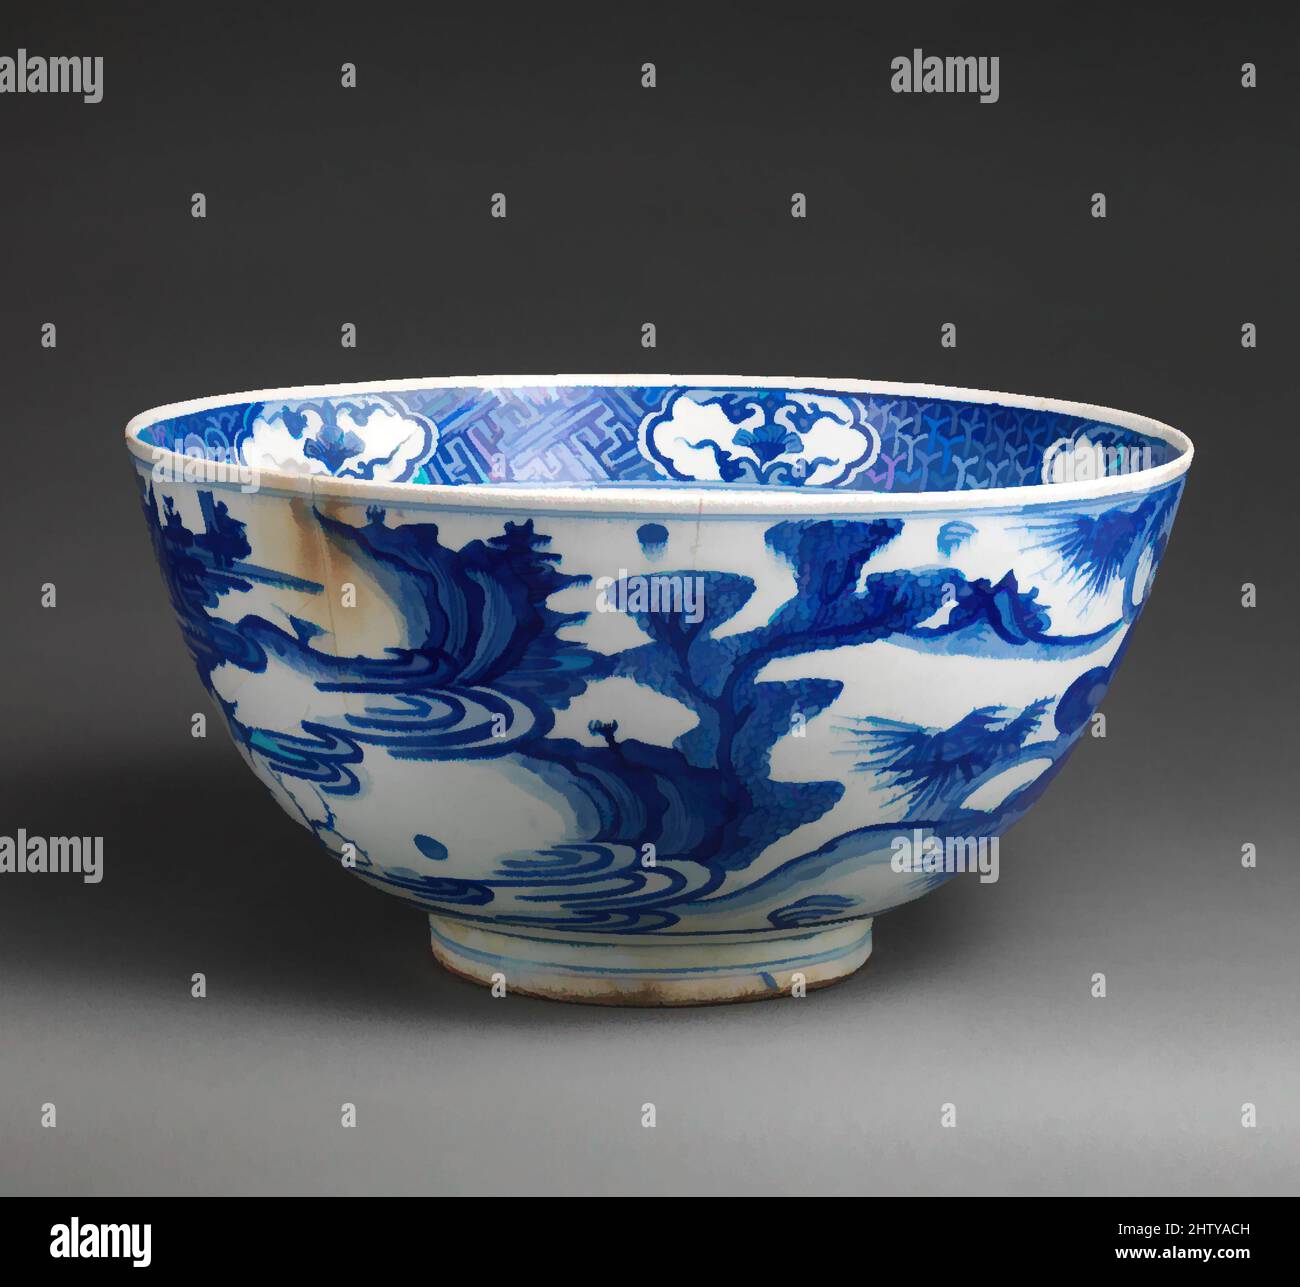 Art inspired by Imitation Blue-and-white Bowl, 17th century, Made in Iran, possibly Mashhad, Stonepaste; painted in blue under transparent glaze, 7 1/2 x 14 1/4 in. (19.1 x 36.2 cm), Ceramics, Like so many ceramics produced in Iran during the Safavid period, the style and decoration of, Classic works modernized by Artotop with a splash of modernity. Shapes, color and value, eye-catching visual impact on art. Emotions through freedom of artworks in a contemporary way. A timeless message pursuing a wildly creative new direction. Artists turning to the digital medium and creating the Artotop NFT Stock Photo